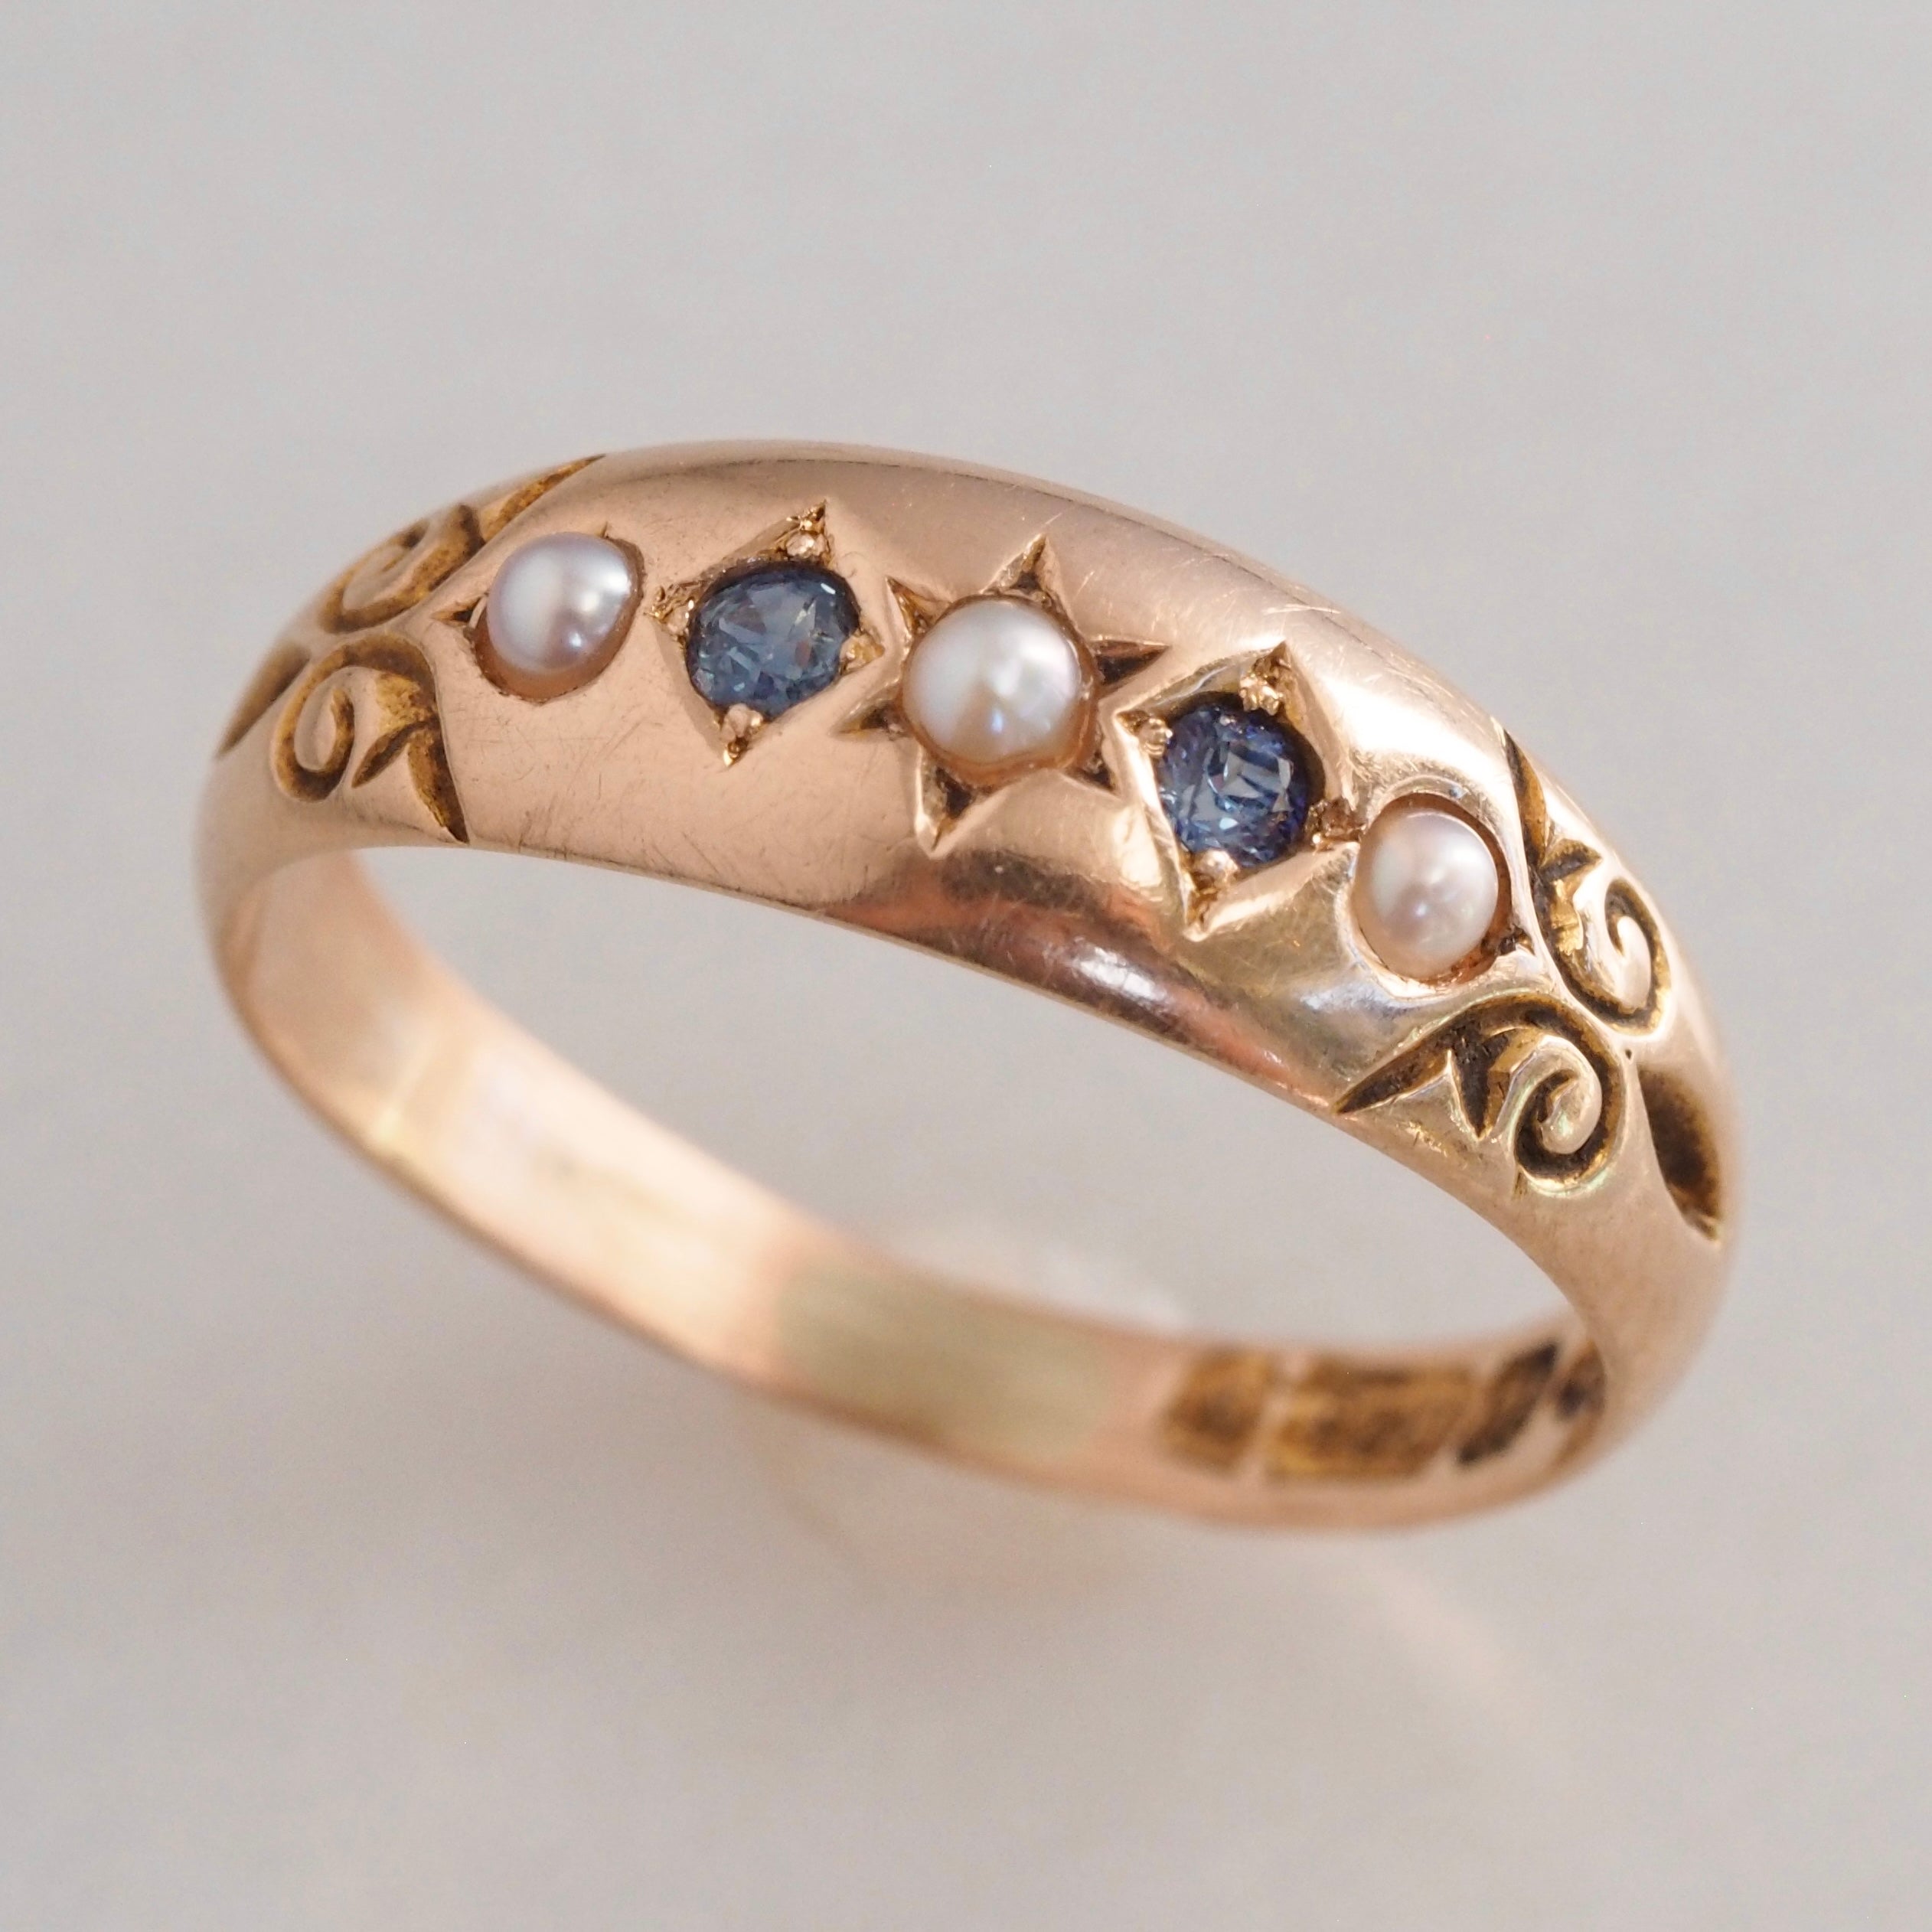 Antique Late Victorian 15k Gold Sapphire and Seed Pearl Flush Set Ring